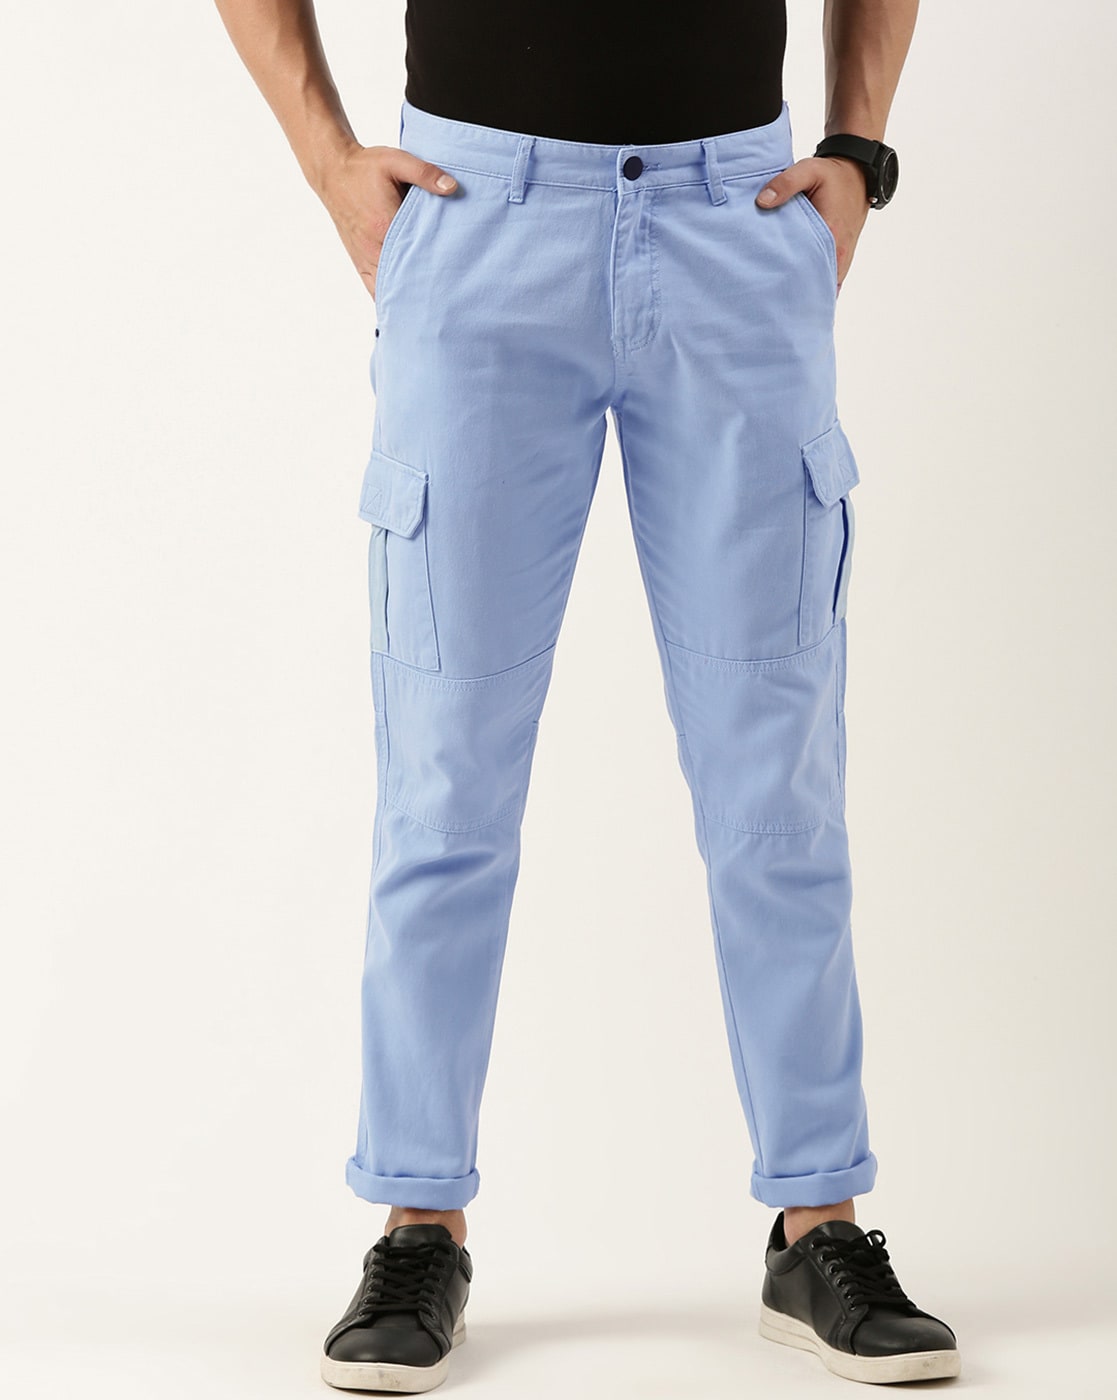 Boys Uniform Twill Woven Pull On Cargo Pants | The Children's Place - NEW  NAVY